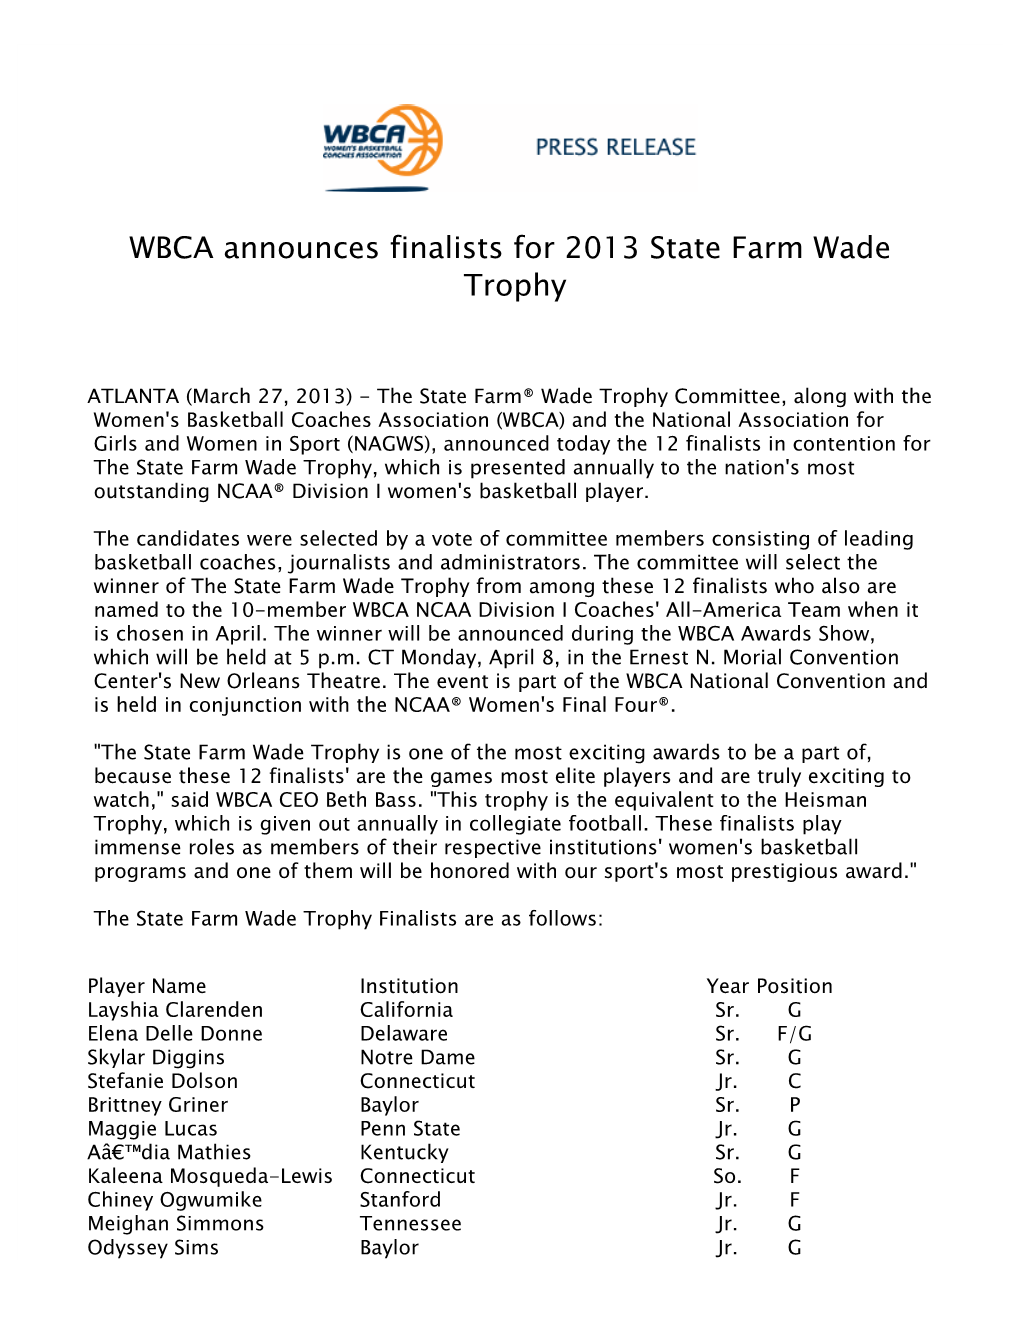 WBCA Announces Finalists for 2013 State Farm Wade Trophy 2012-13